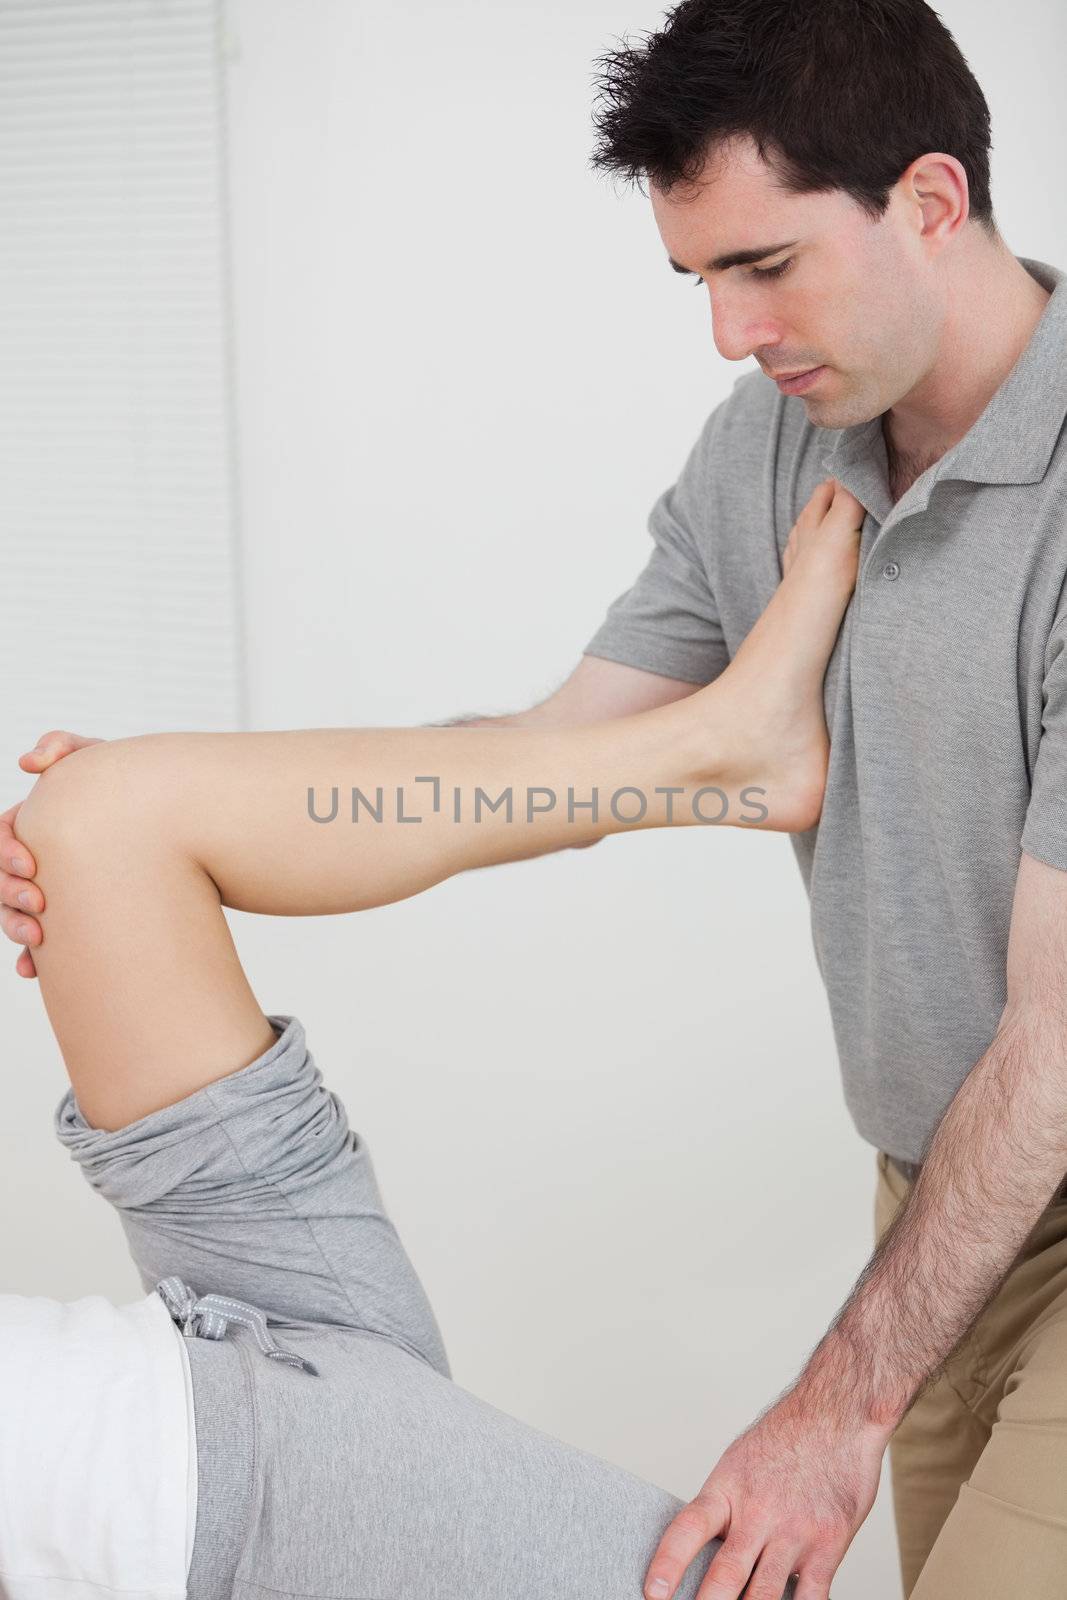 Physiotherapist stretching a leg while placed it on his chest in a room